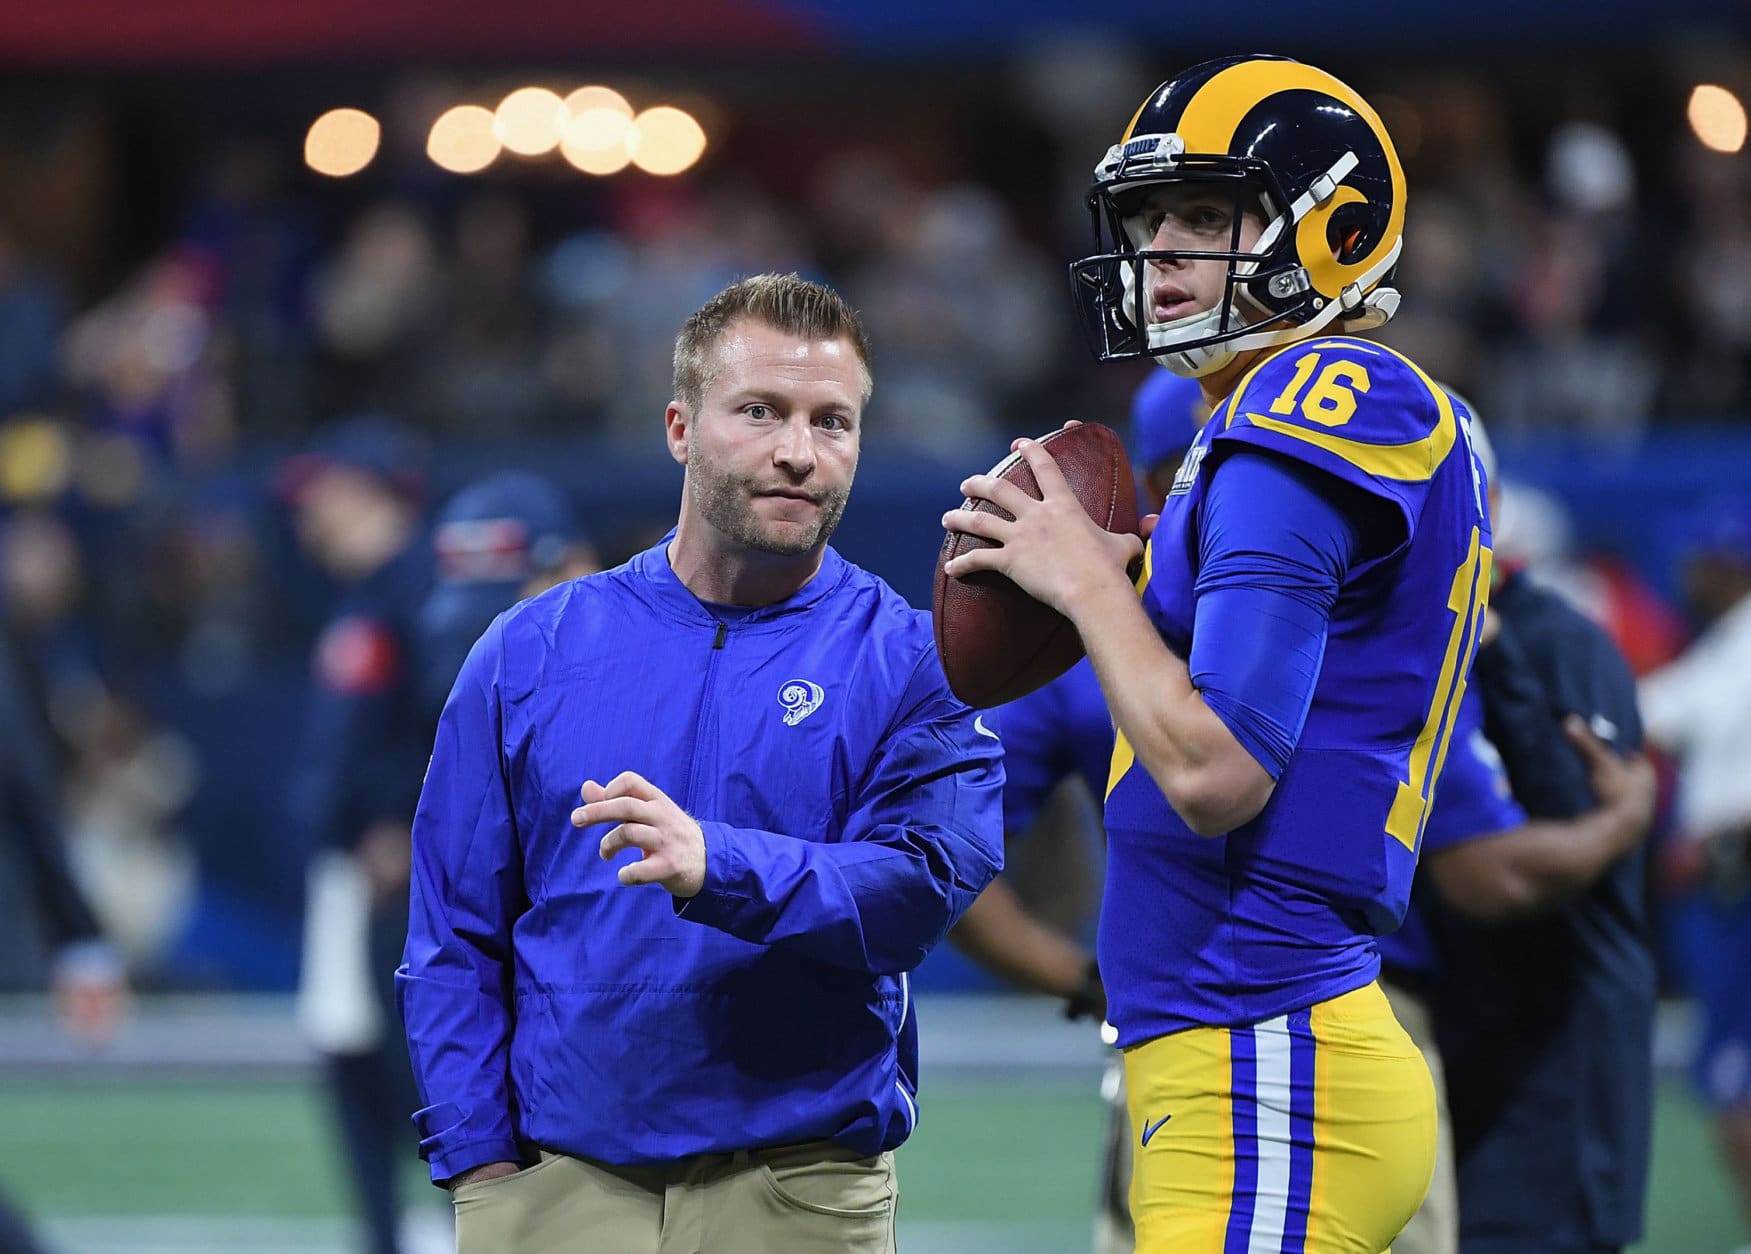 ATLANTA, GA - FEBRUARY 03:  Head Coach Sean McVay of the Los Angeles Rams speaks to Jared Goff #16 of the Los Angeles Rams during Super Bowl LIII against the New England Patriots at Mercedes-Benz Stadium on February 3, 2019 in Atlanta, Georgia.  (Photo by Harry How/Getty Images)